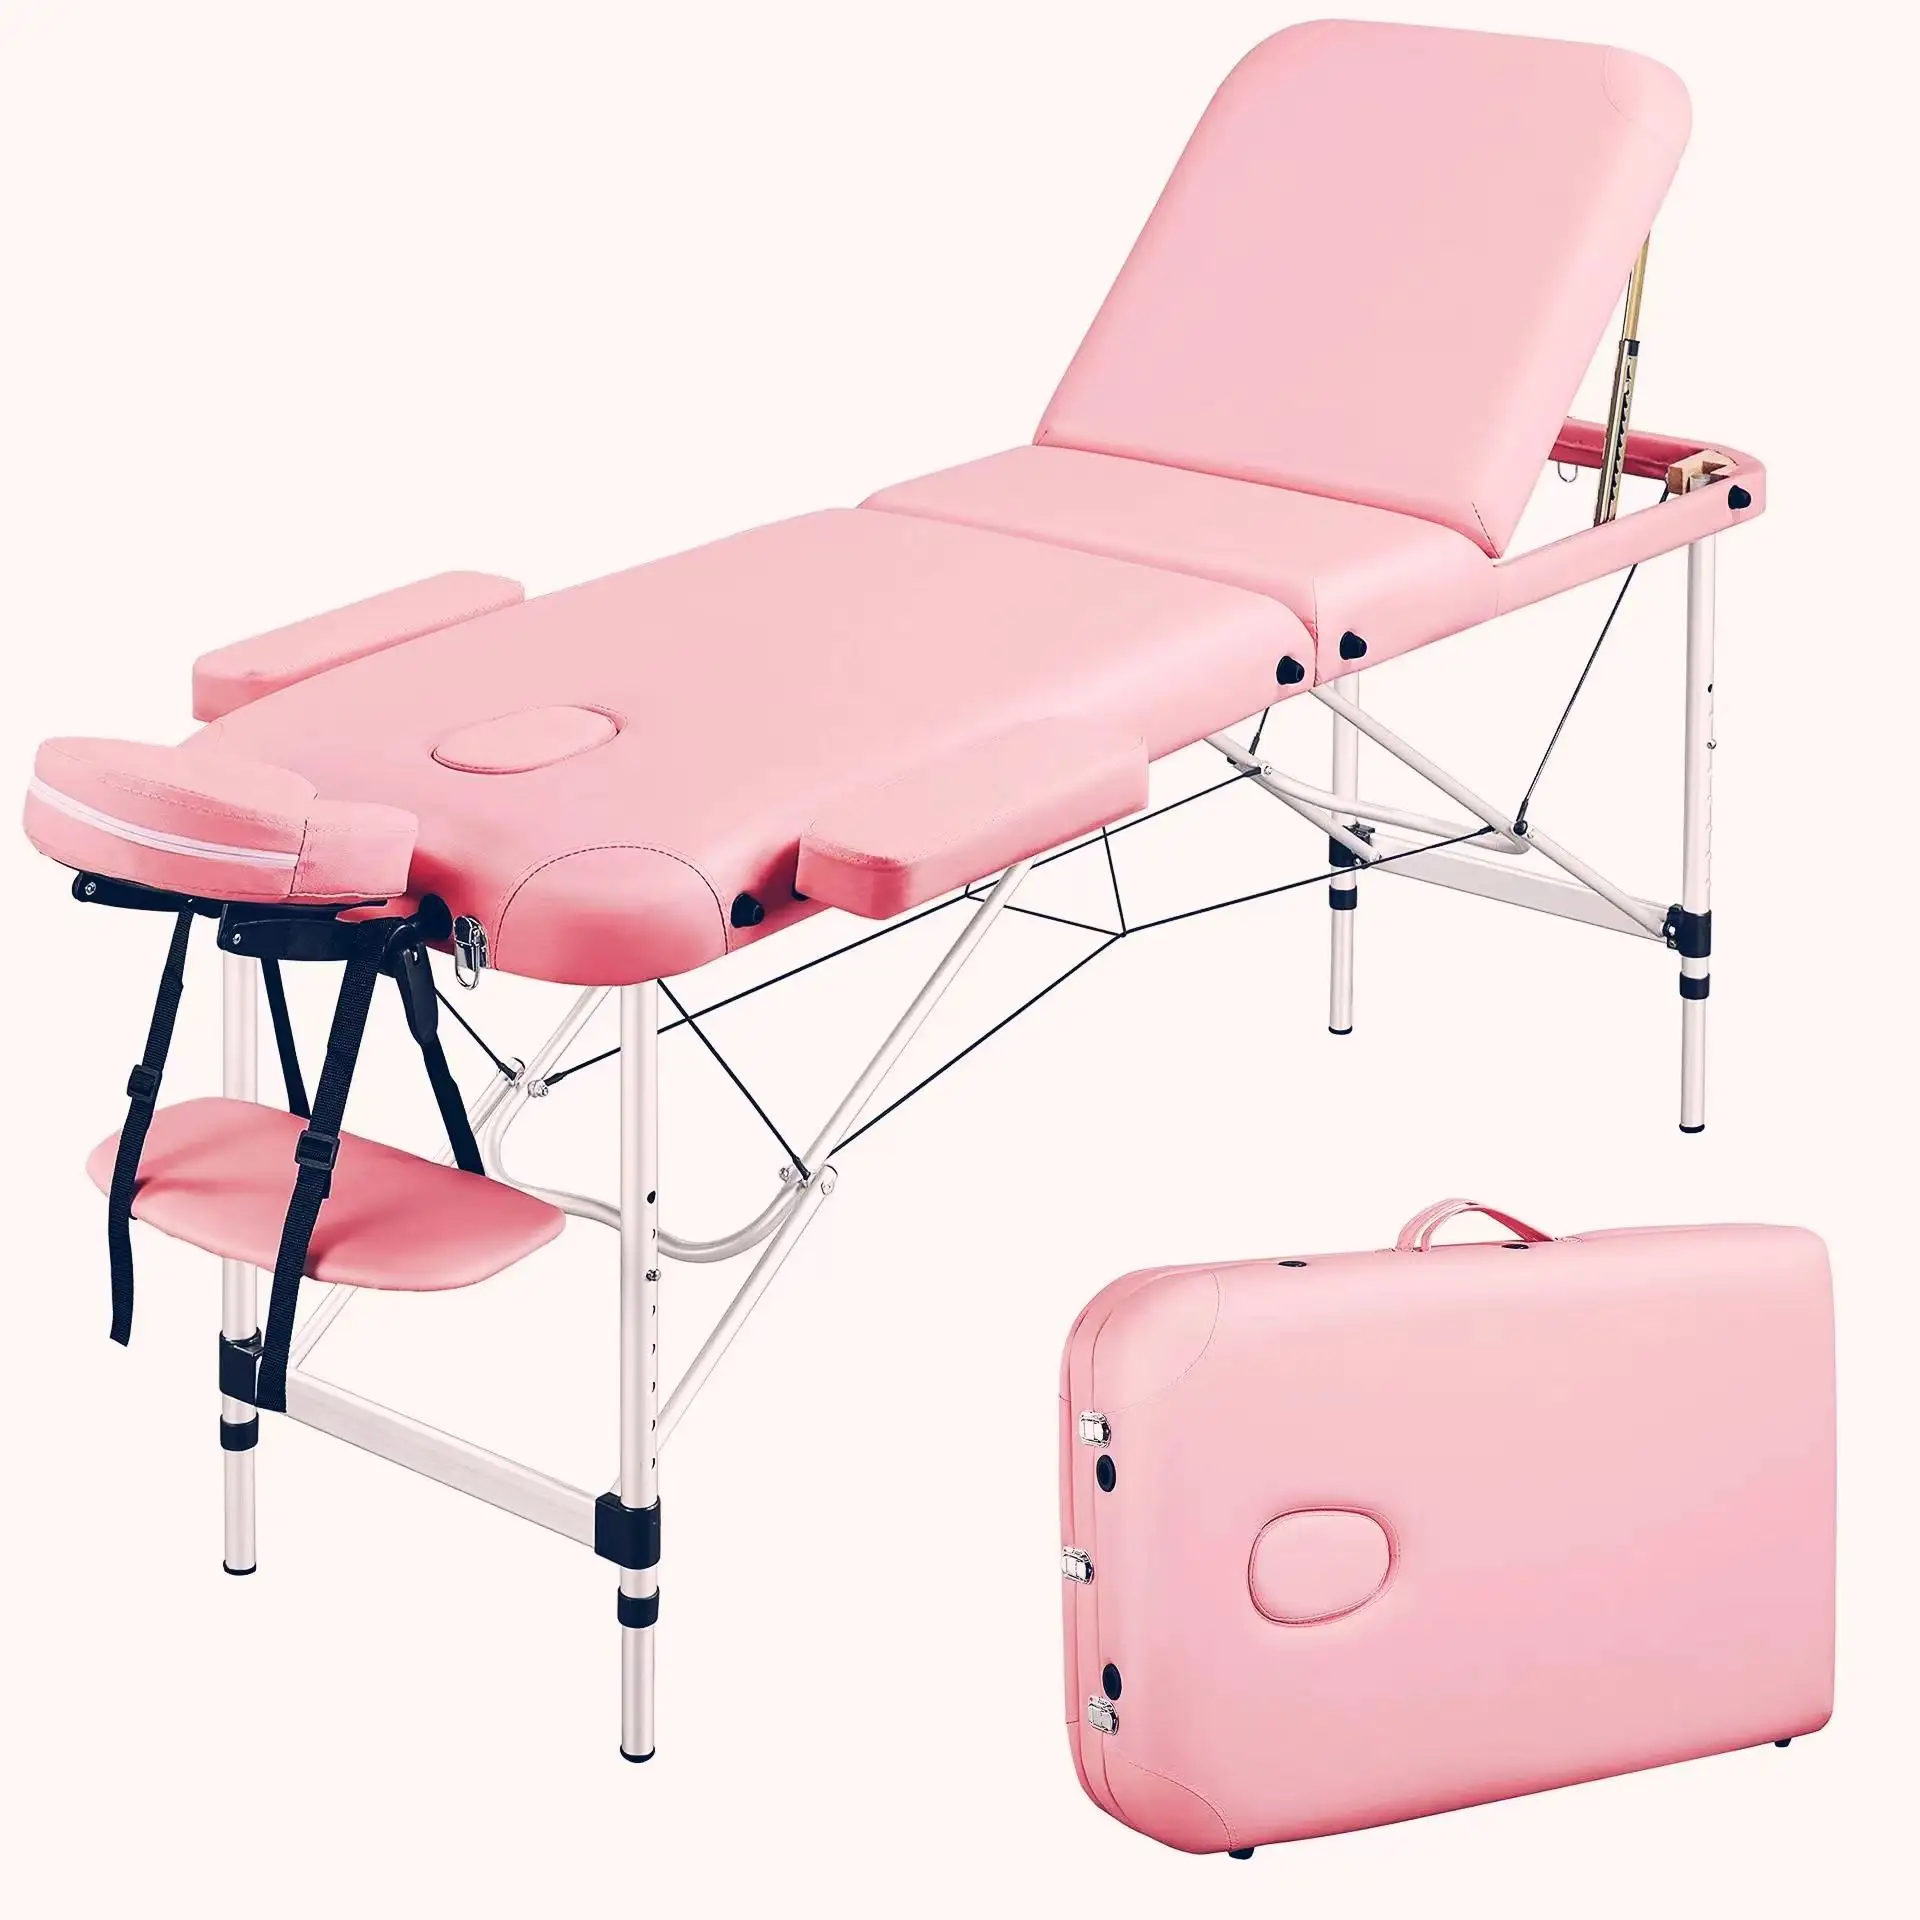 The best-selling three fold color options include lightweight aluminum massage beds/portable metal frame massage beds